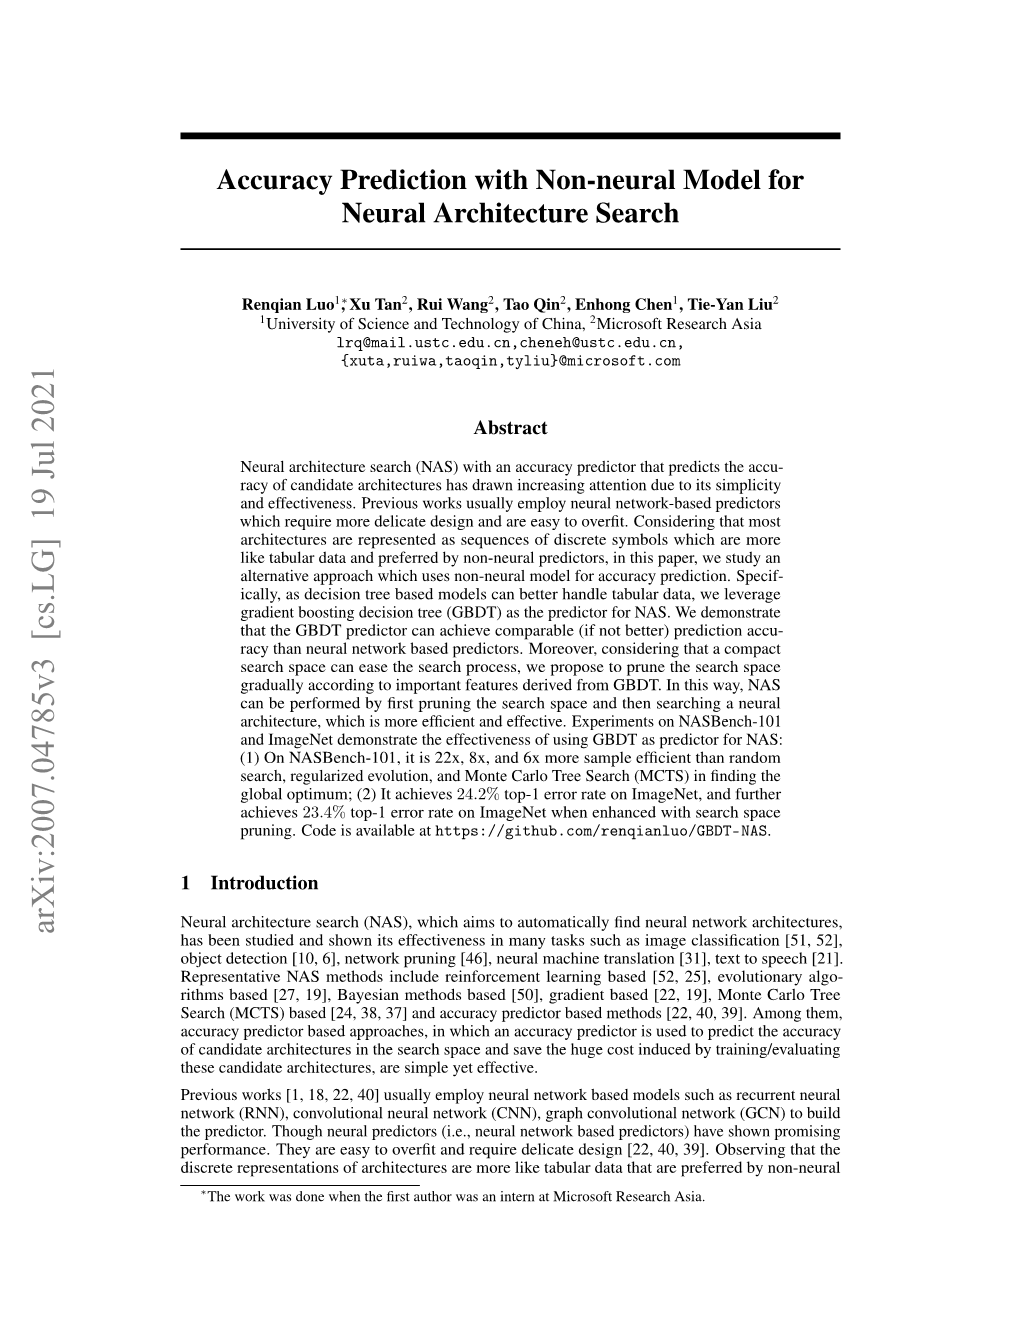 Accuracy Prediction with Non-Neural Model for Neural Architecture Search